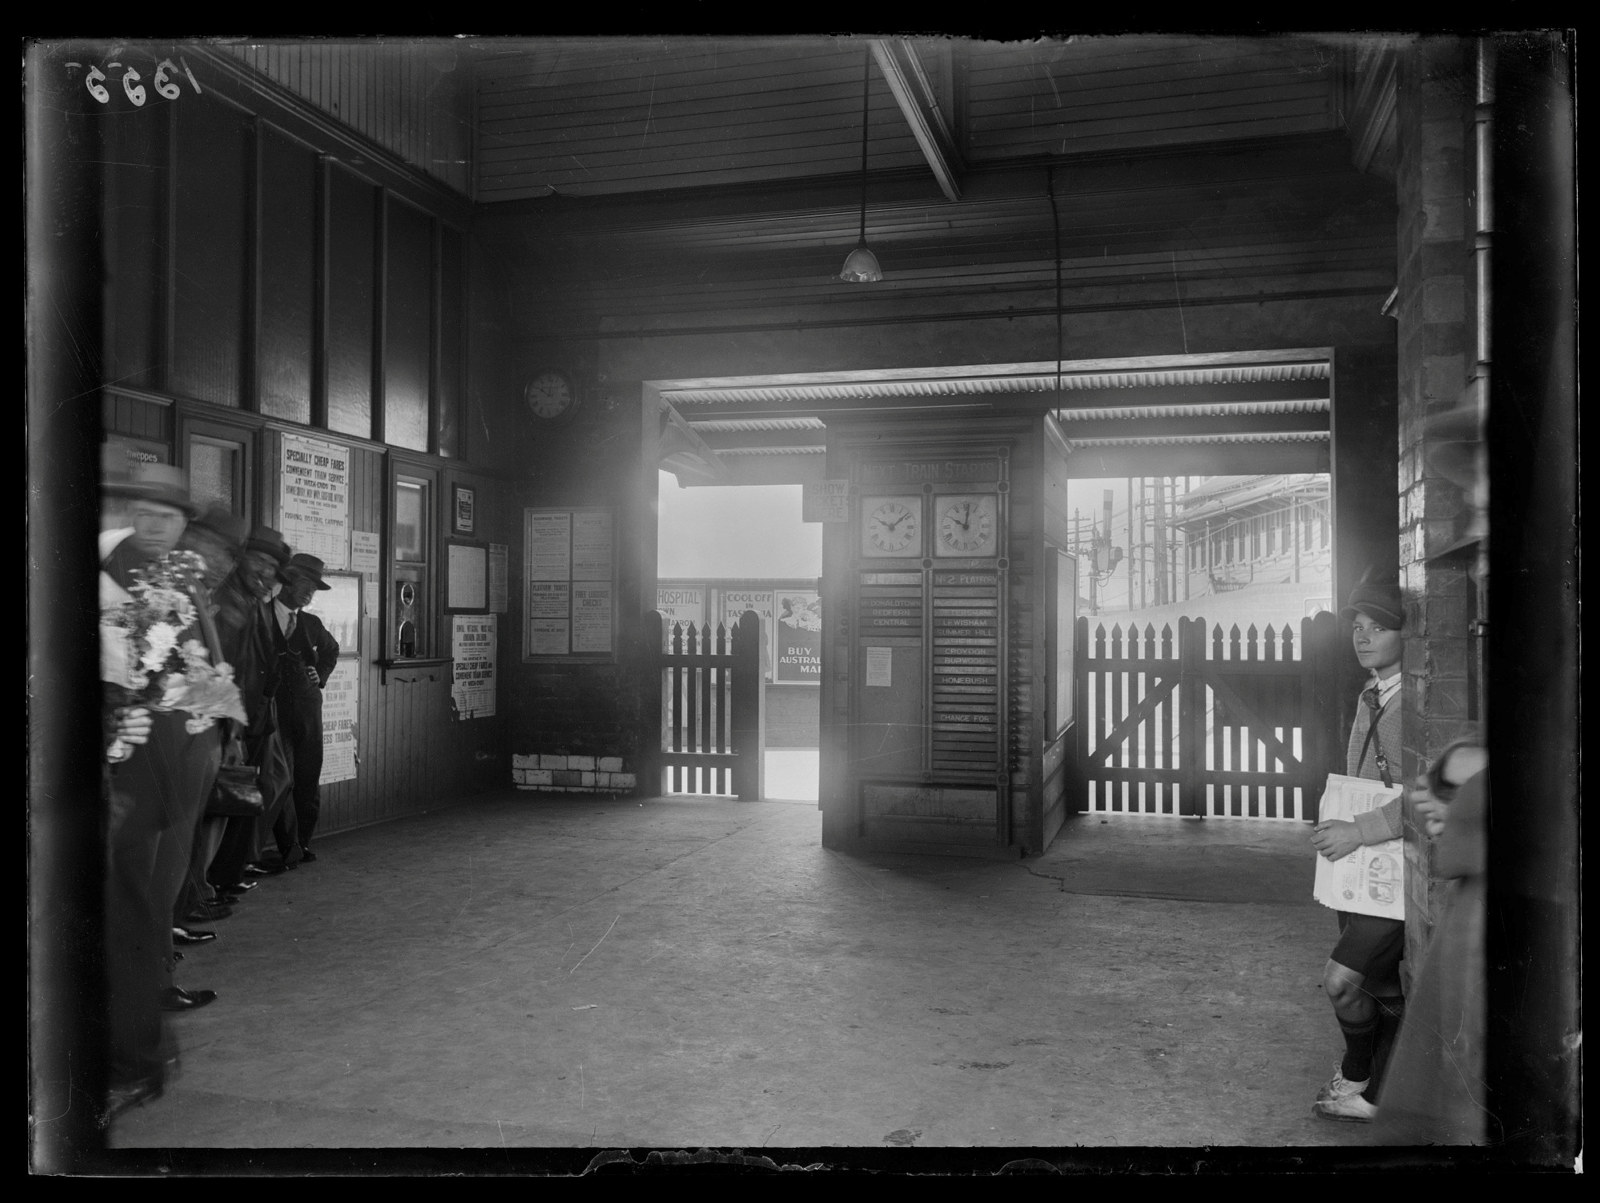 Black and white photo of interior of station entrance way, looking out to street.